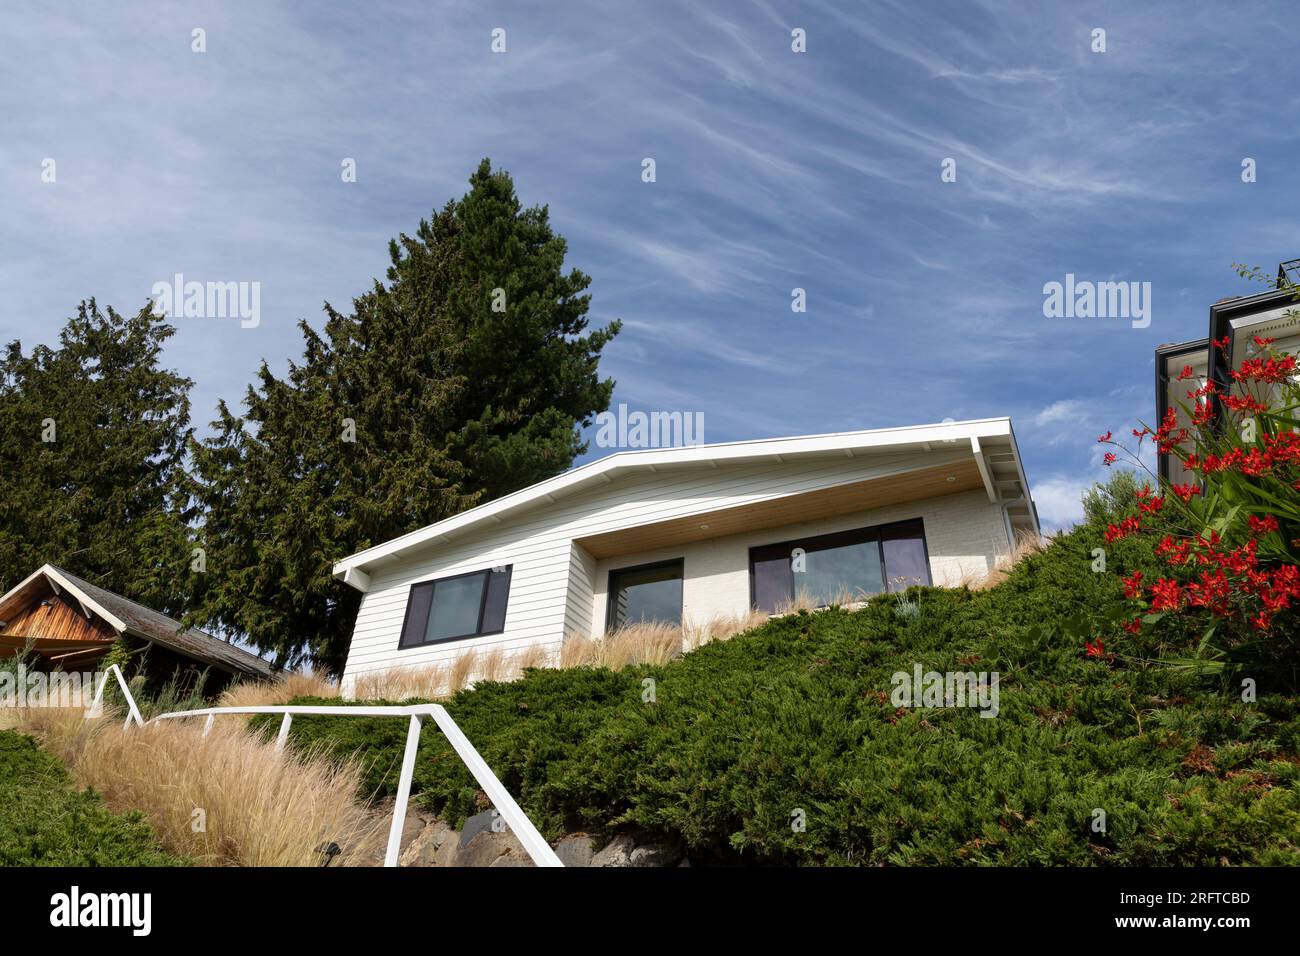 Lush landscaping surrounds homes in Seattle’s affluent North Admiral neighborhood Stock Photo